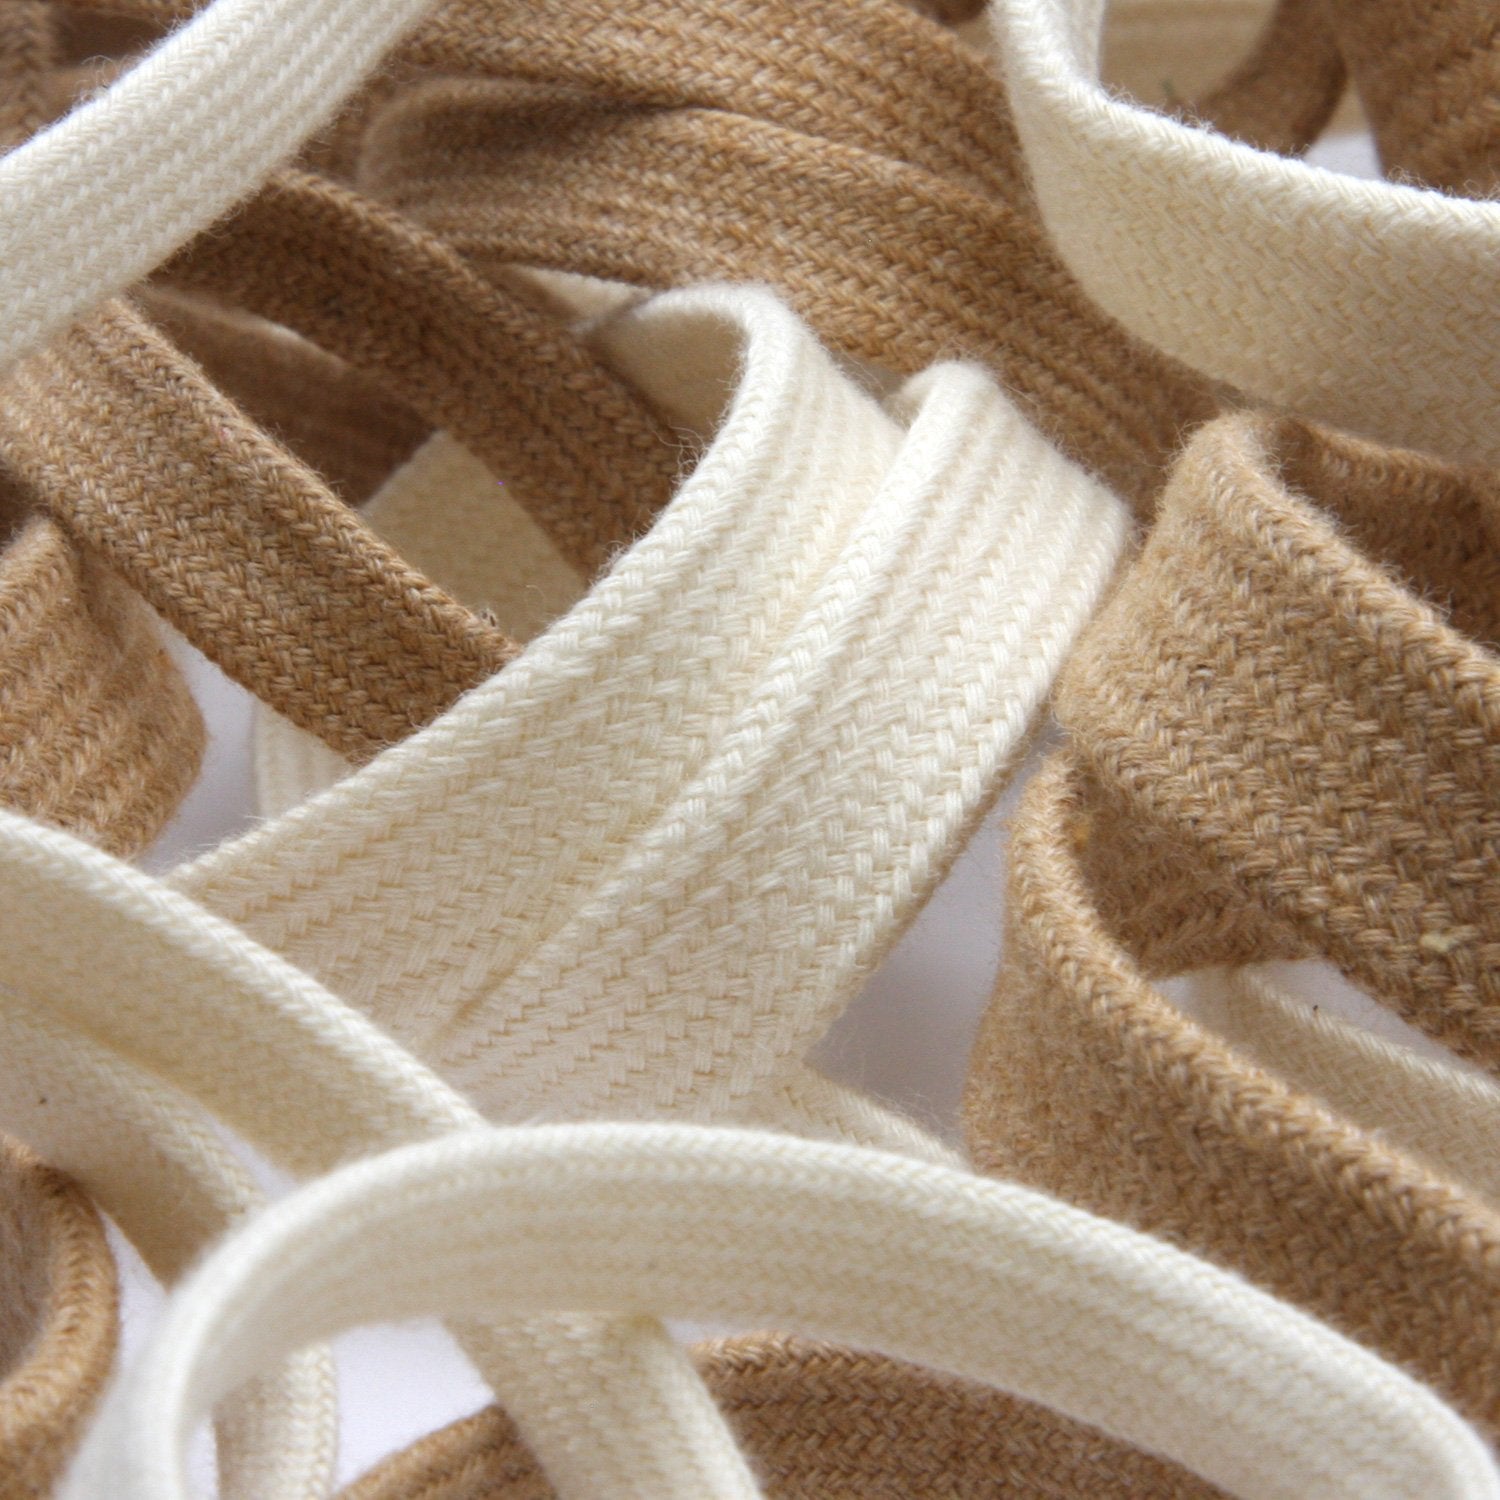 FUJIYAMA RIBBON [Wholesale] Organic Cotton Spindle Cord approx.9mm 50 Meters Roll